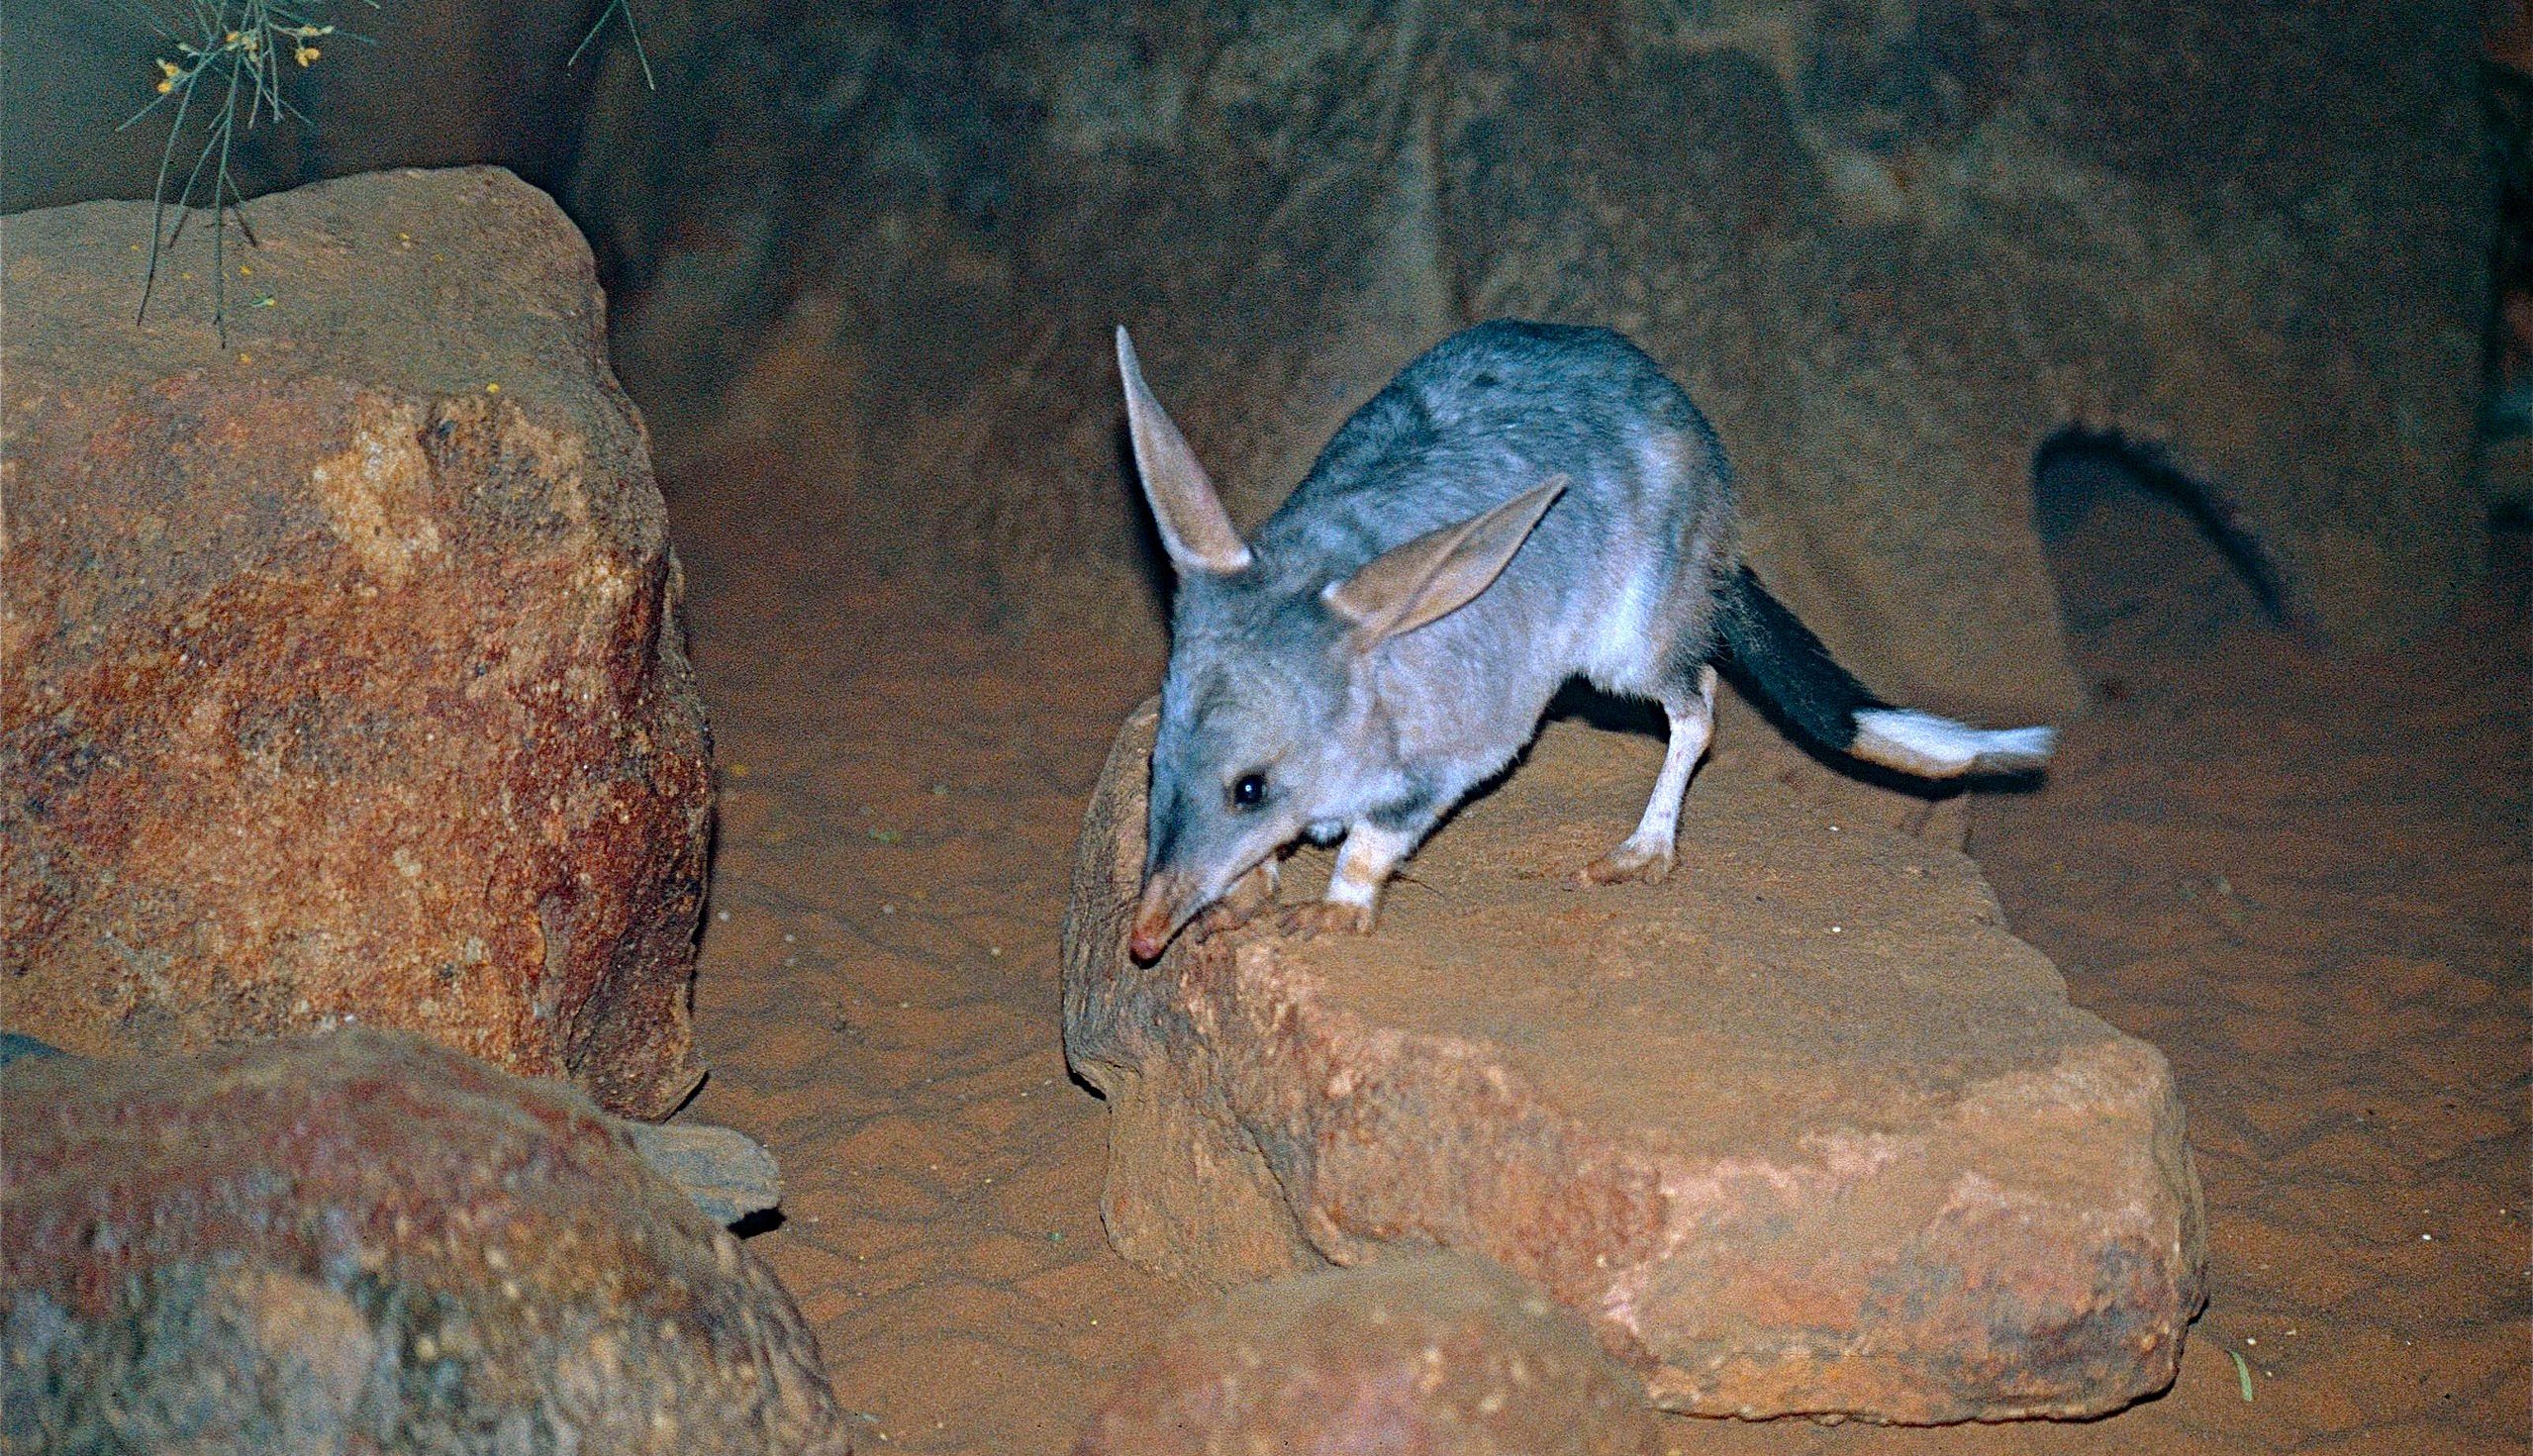 small rabbit-like marsupial with large ears and a black and white tail